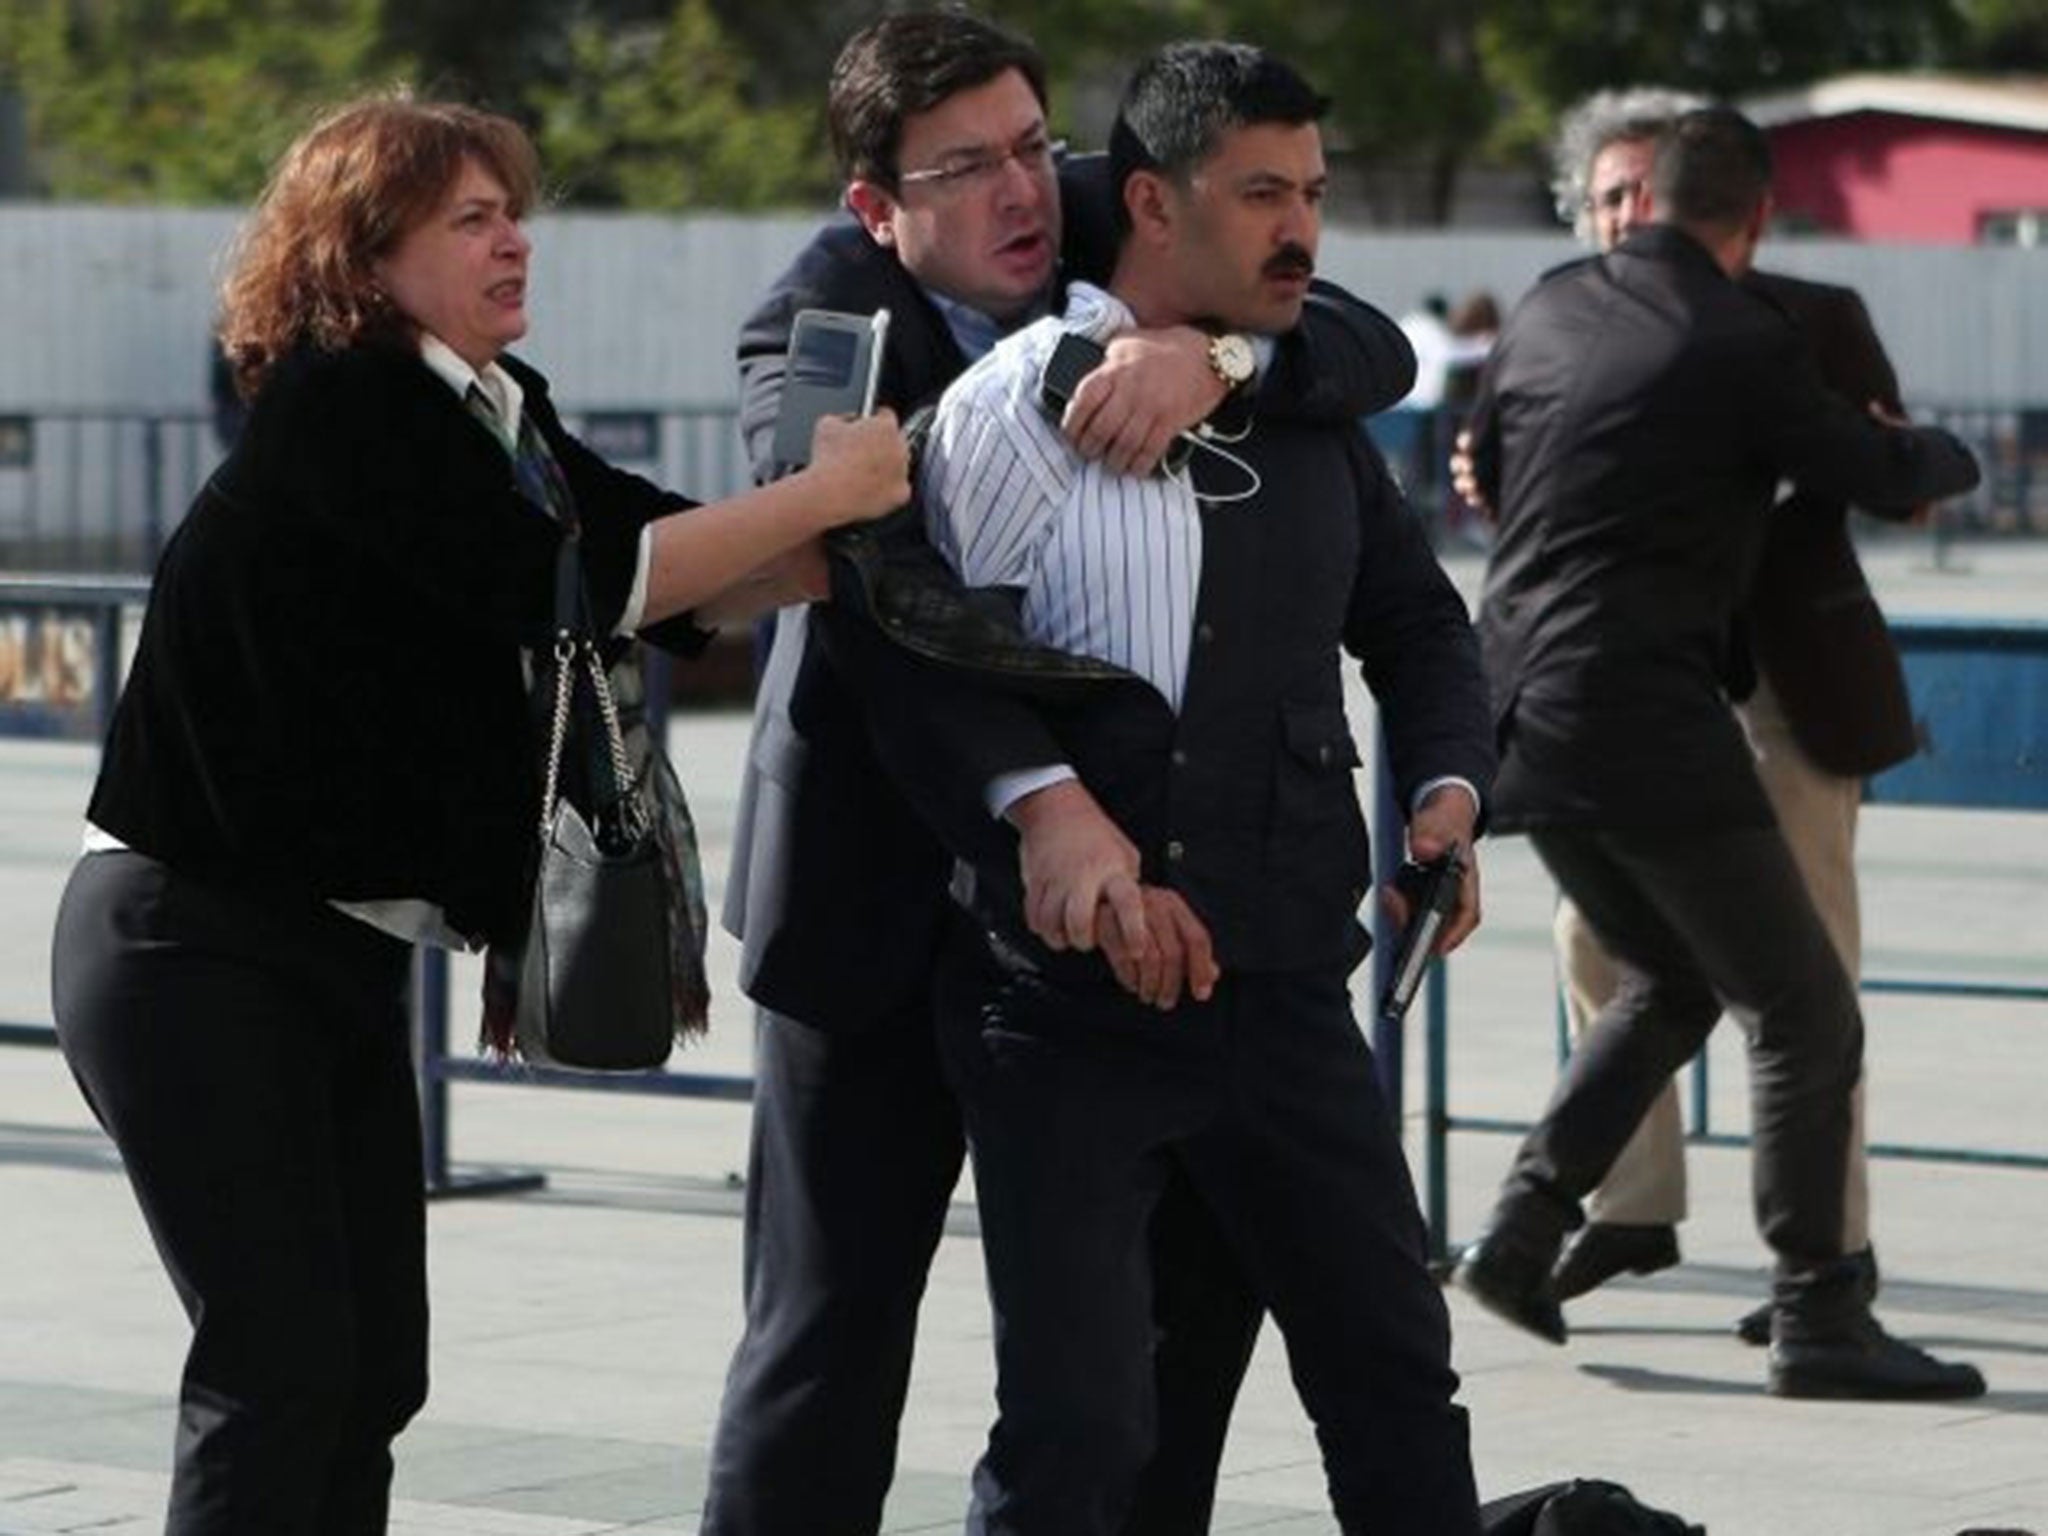 A handout picture provided by Cumhuriyet newspaper shows Dilek Dundar (L), wife of Can Dundar, and opposition party CHP lawmaker Muharrem Erkek try to capture Murat Sahin (R) he attempted to attack Can Dundar in front of the Courthouse in Istanbul, Turkey, 6 May, 2016